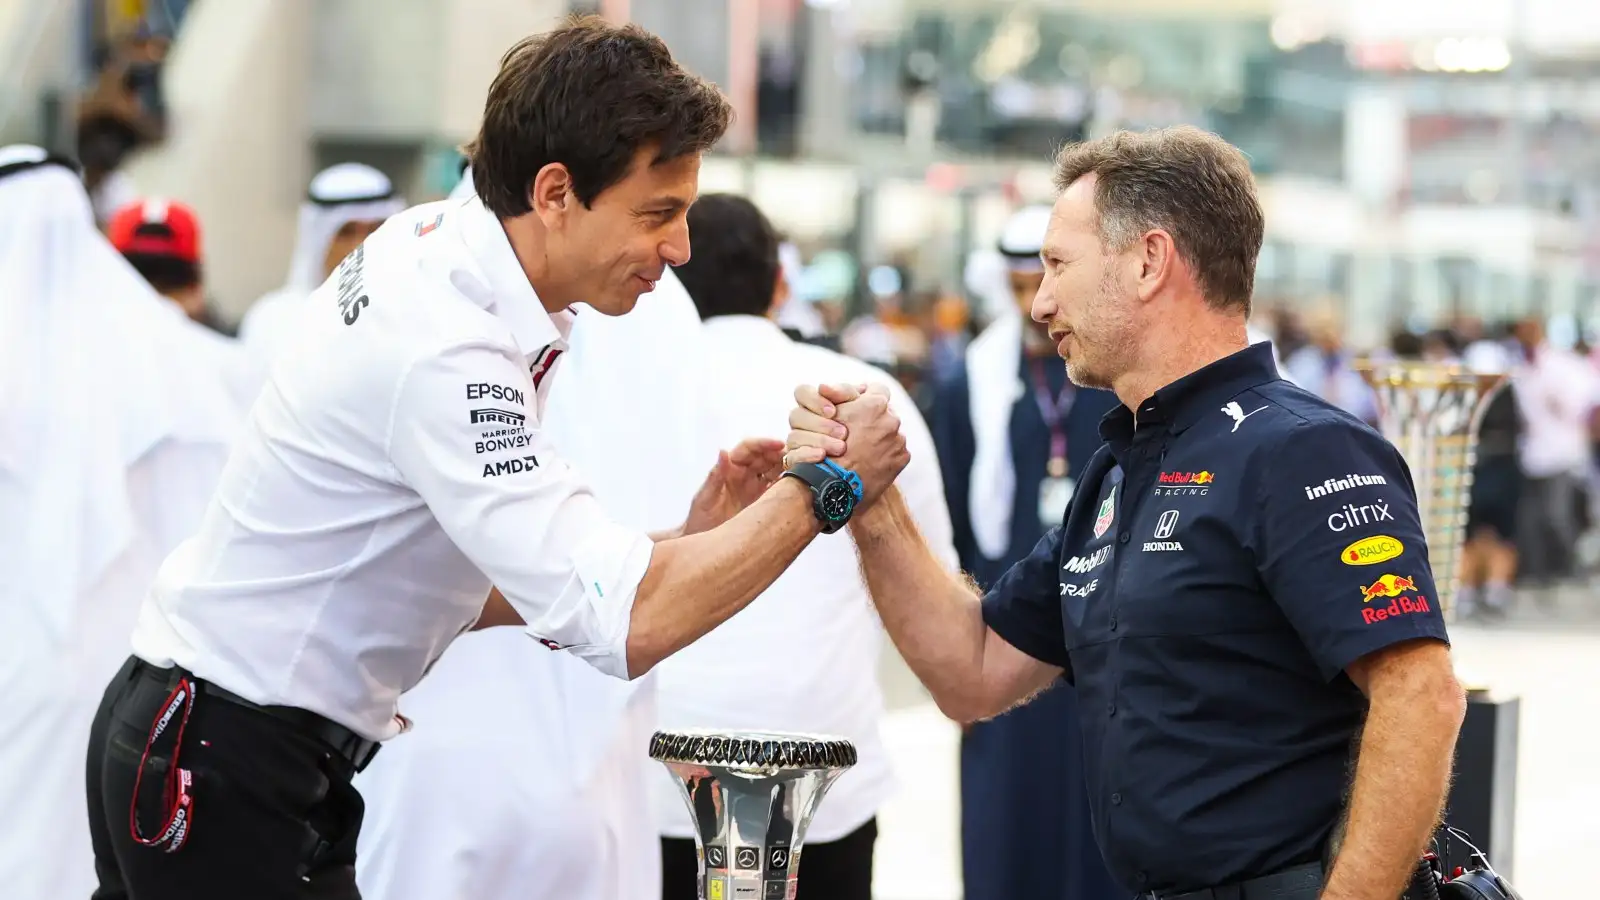 F1 team principals Toto Wolff and Christian Horner shake hands. Abu Dhabi, December 2021.